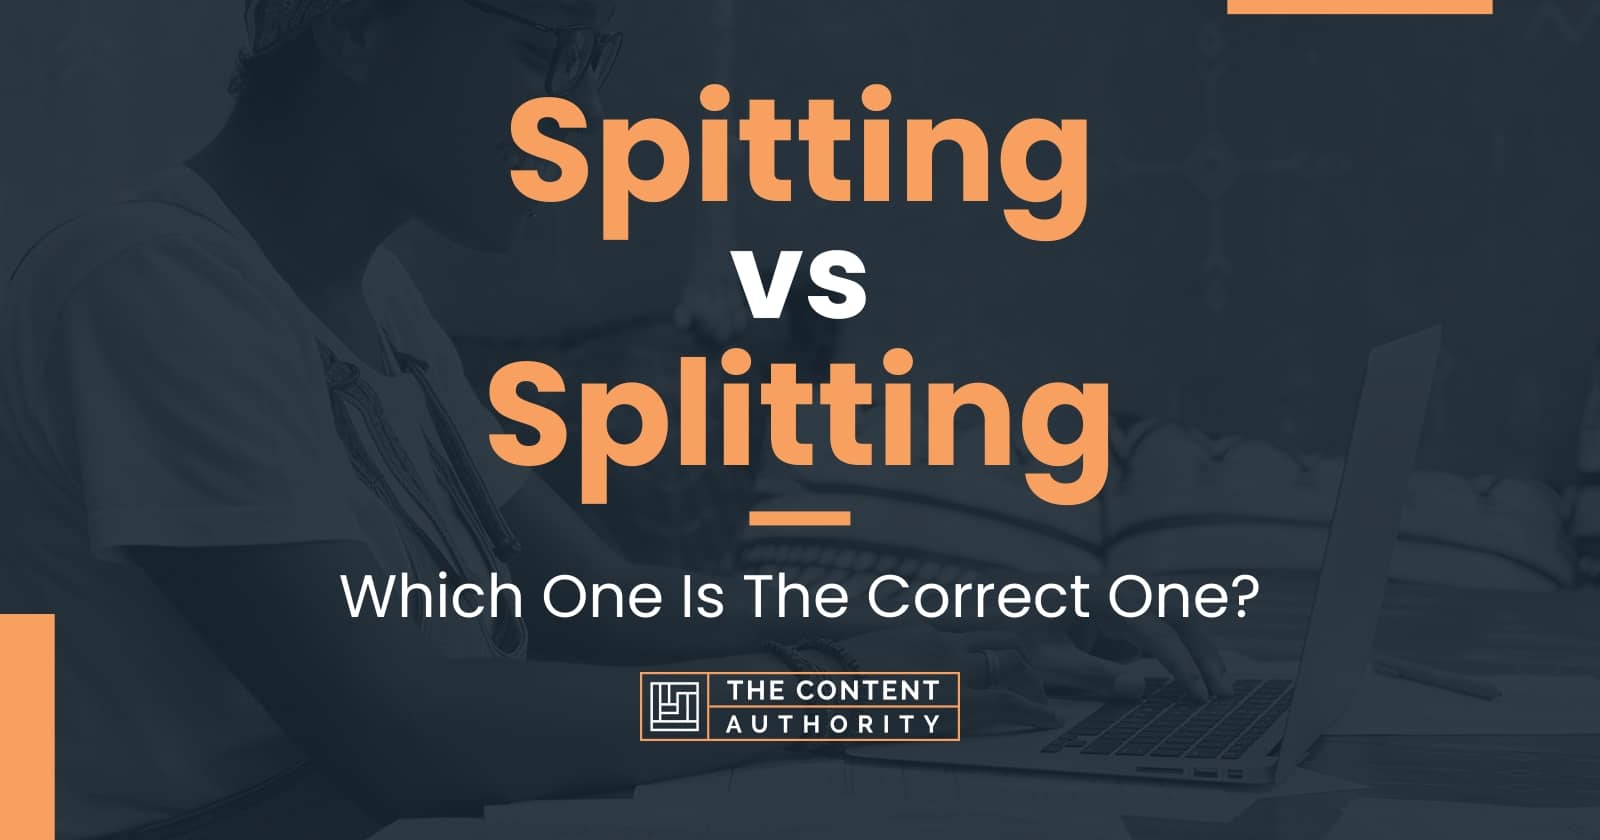 Spitting vs Splitting: Which One Is The Correct One?